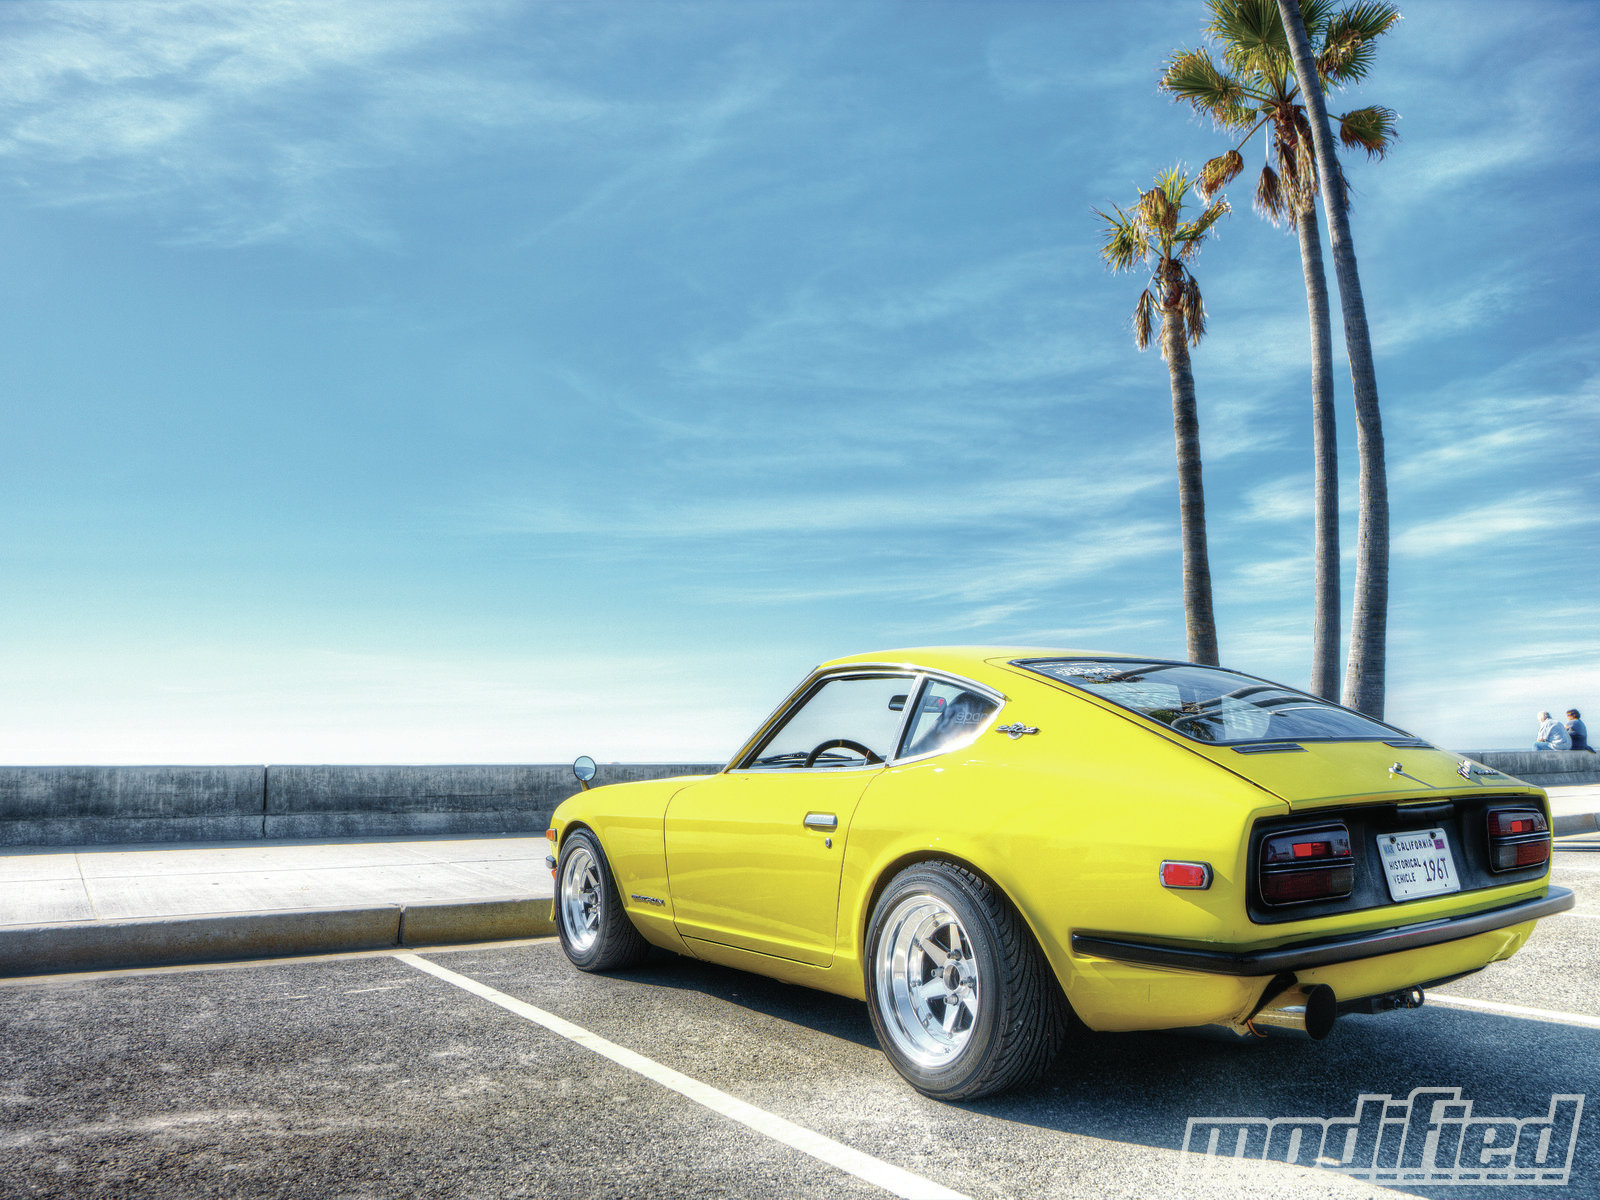 1970 Datsun 240z Wallpaper - Say About Old Car , HD Wallpaper & Backgrounds